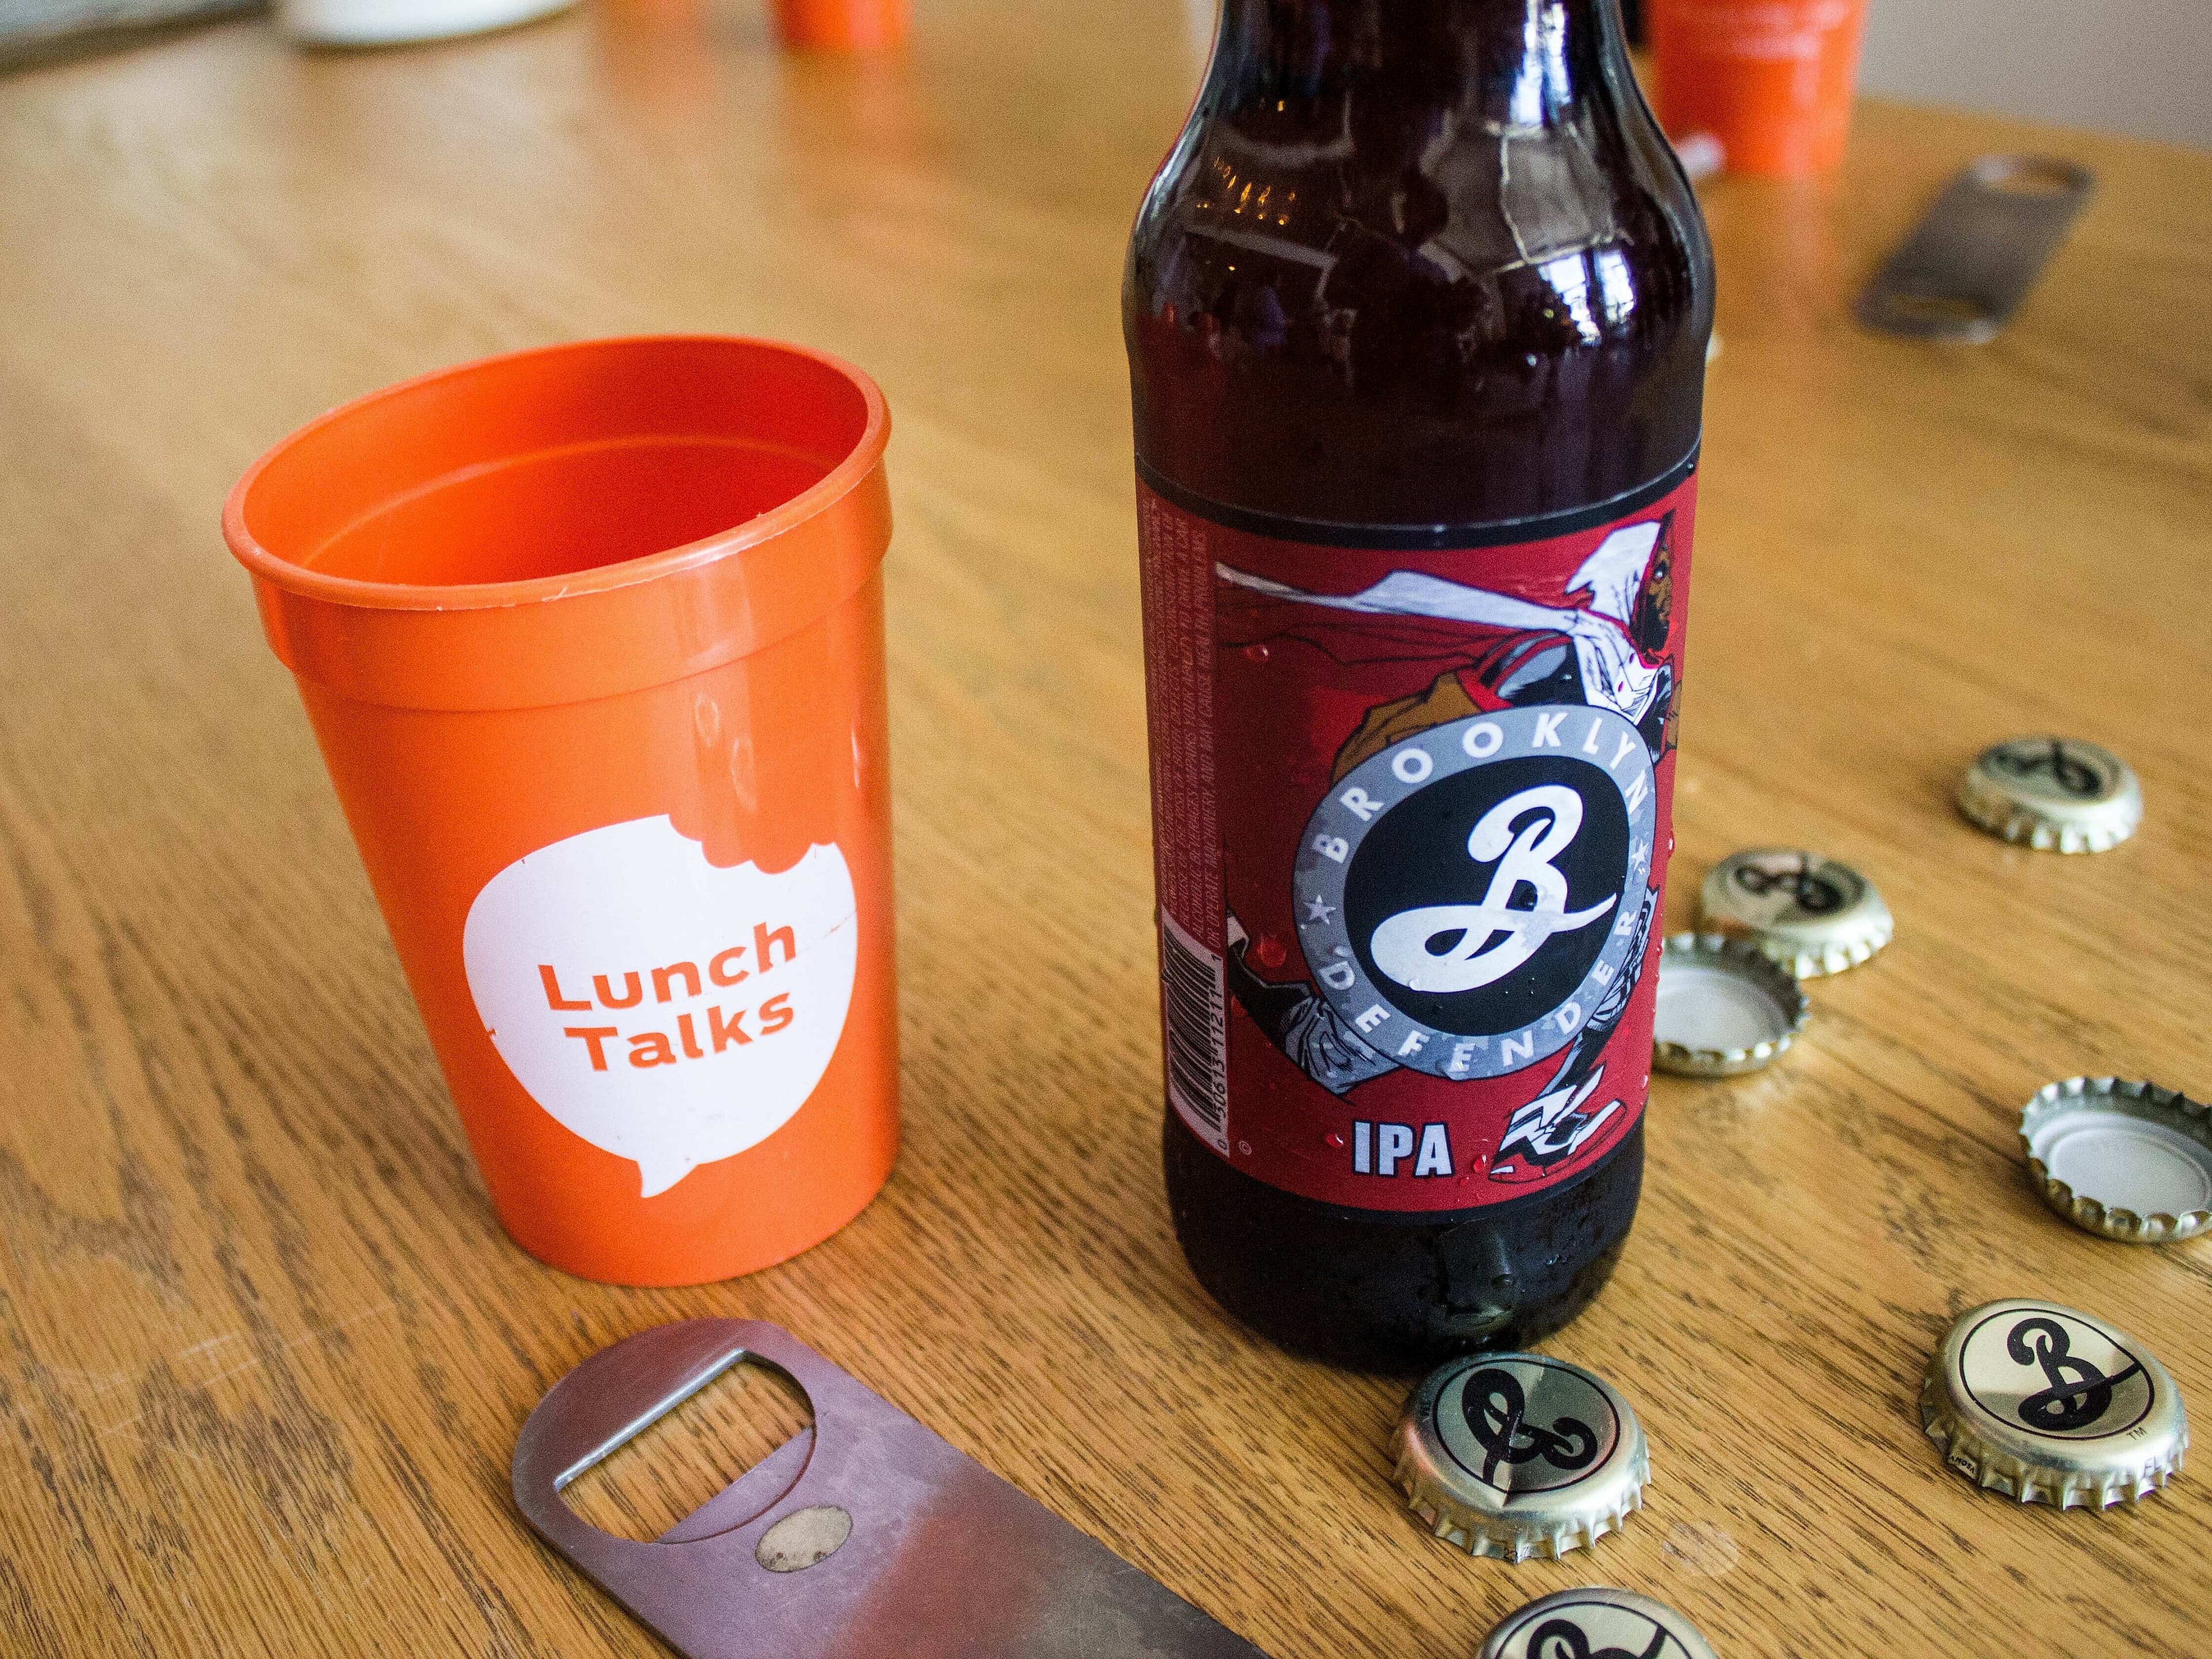 An orange cup with the words "Lunch Talks" next to a bottle of Brooklyn Defender IPA on a wooden table. Several bottle caps and an opener are scattered around the bottle.